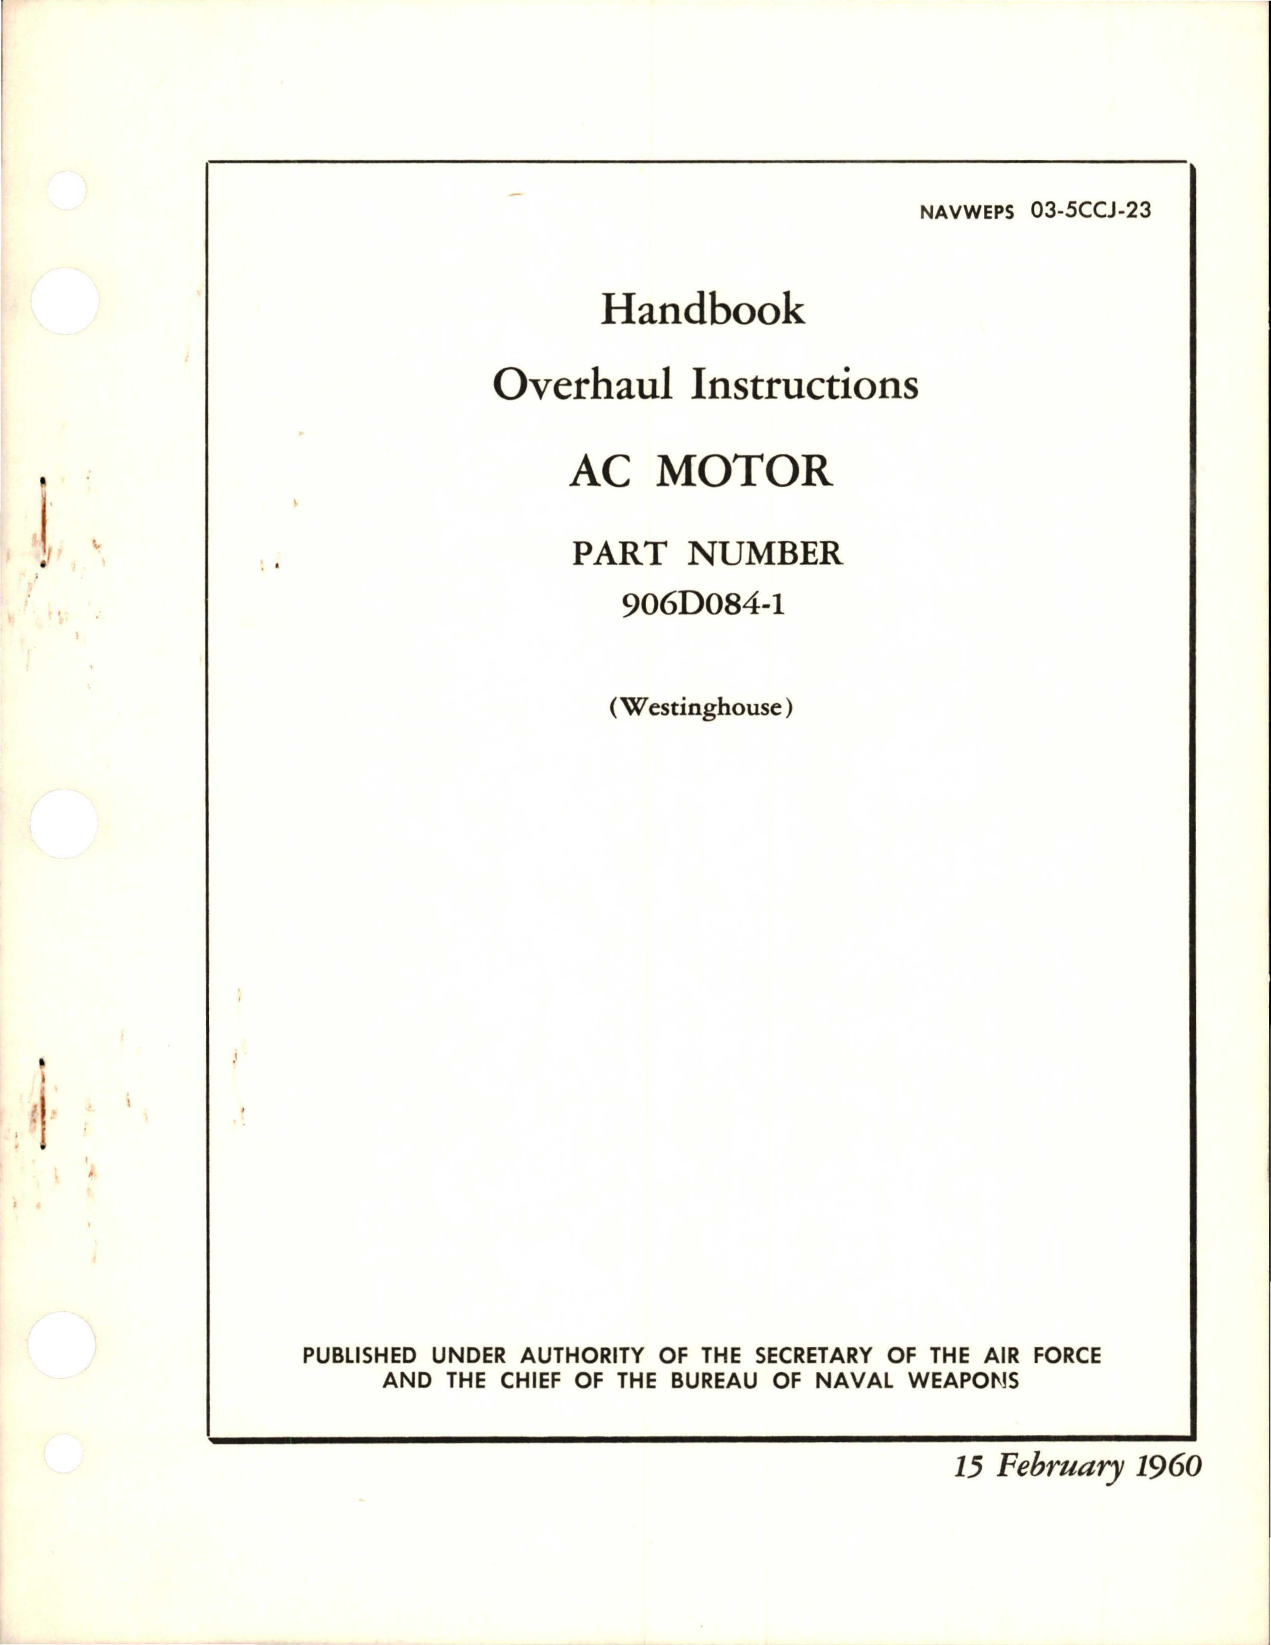 Sample page 1 from AirCorps Library document: Overhaul Instructions for AC Motor - Part 906D084-1